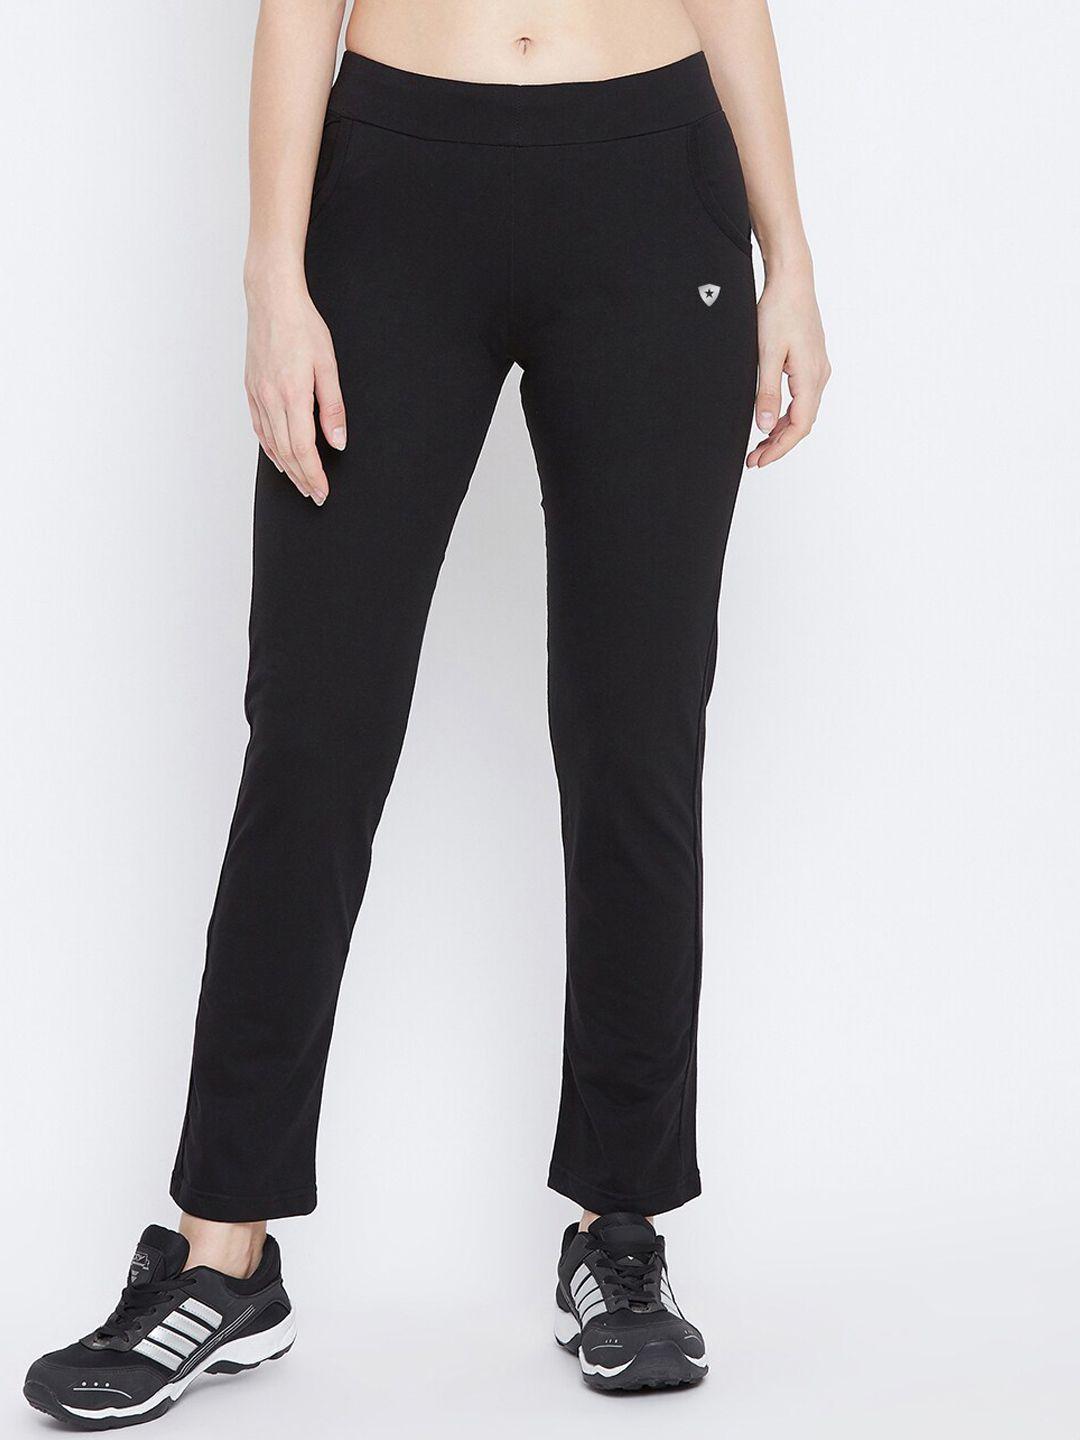 french flexious women mid-rise track pants